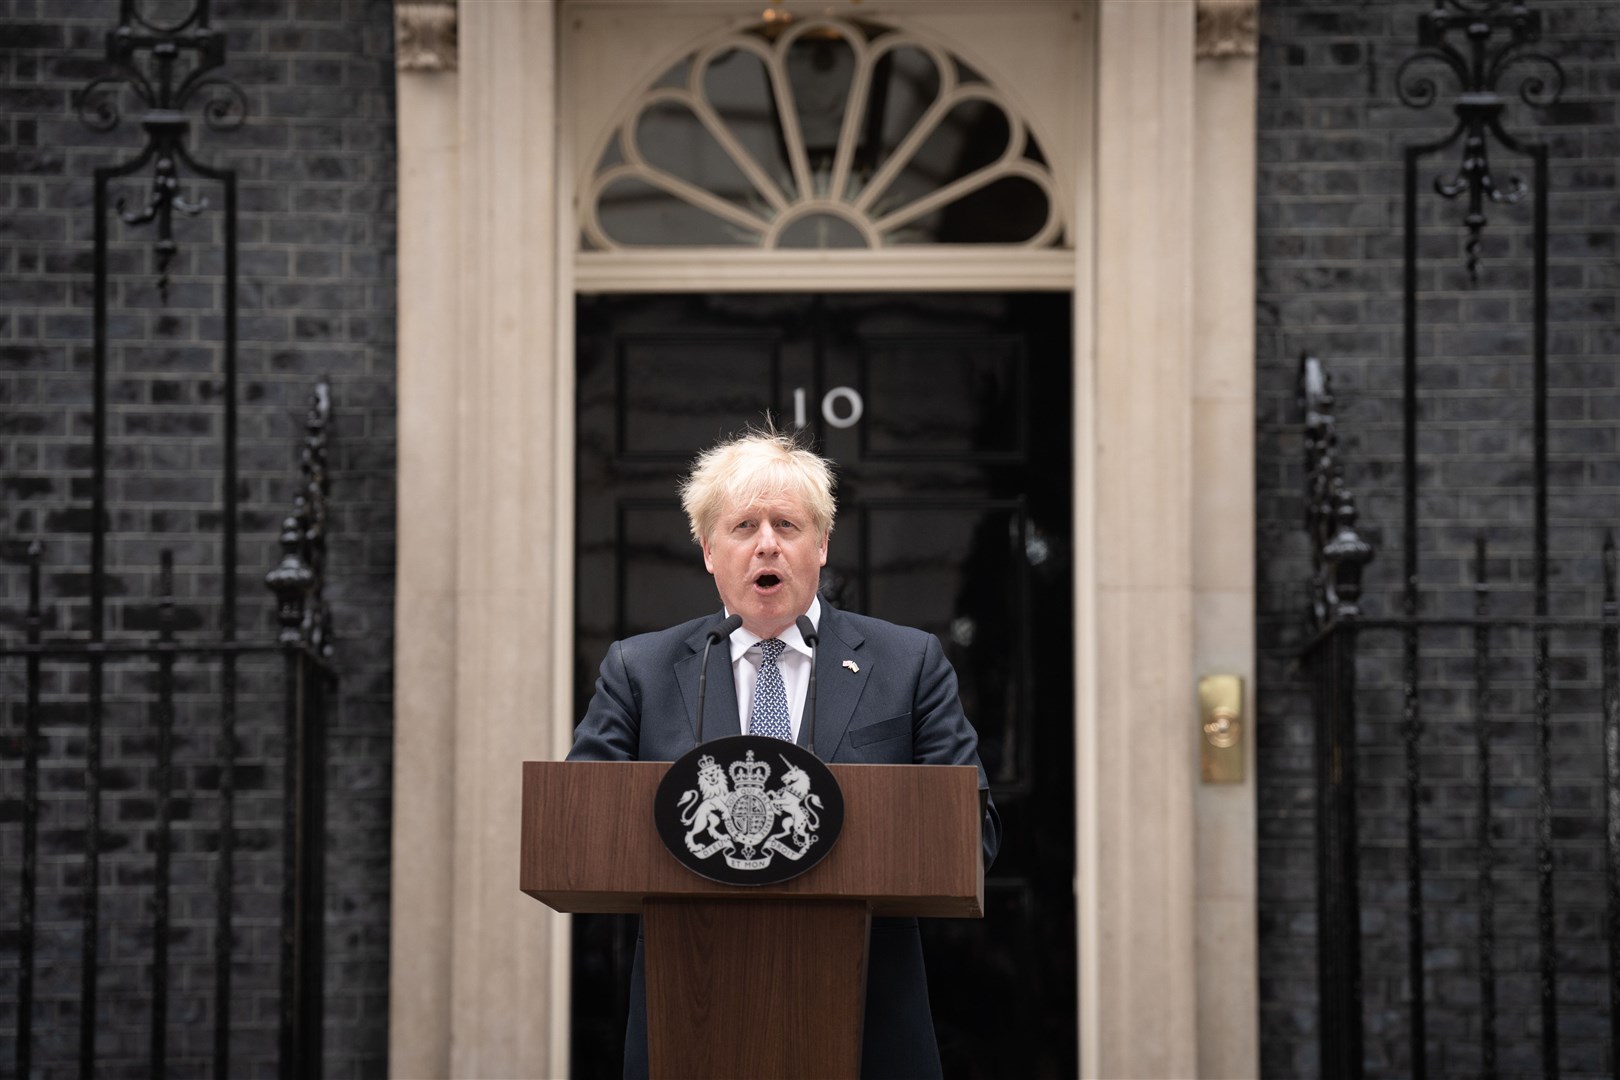 Prime Minister Boris Johnson made a statement outside 10 Downing Street as he confirmed his resignation (Stefan Rousseau/PA)